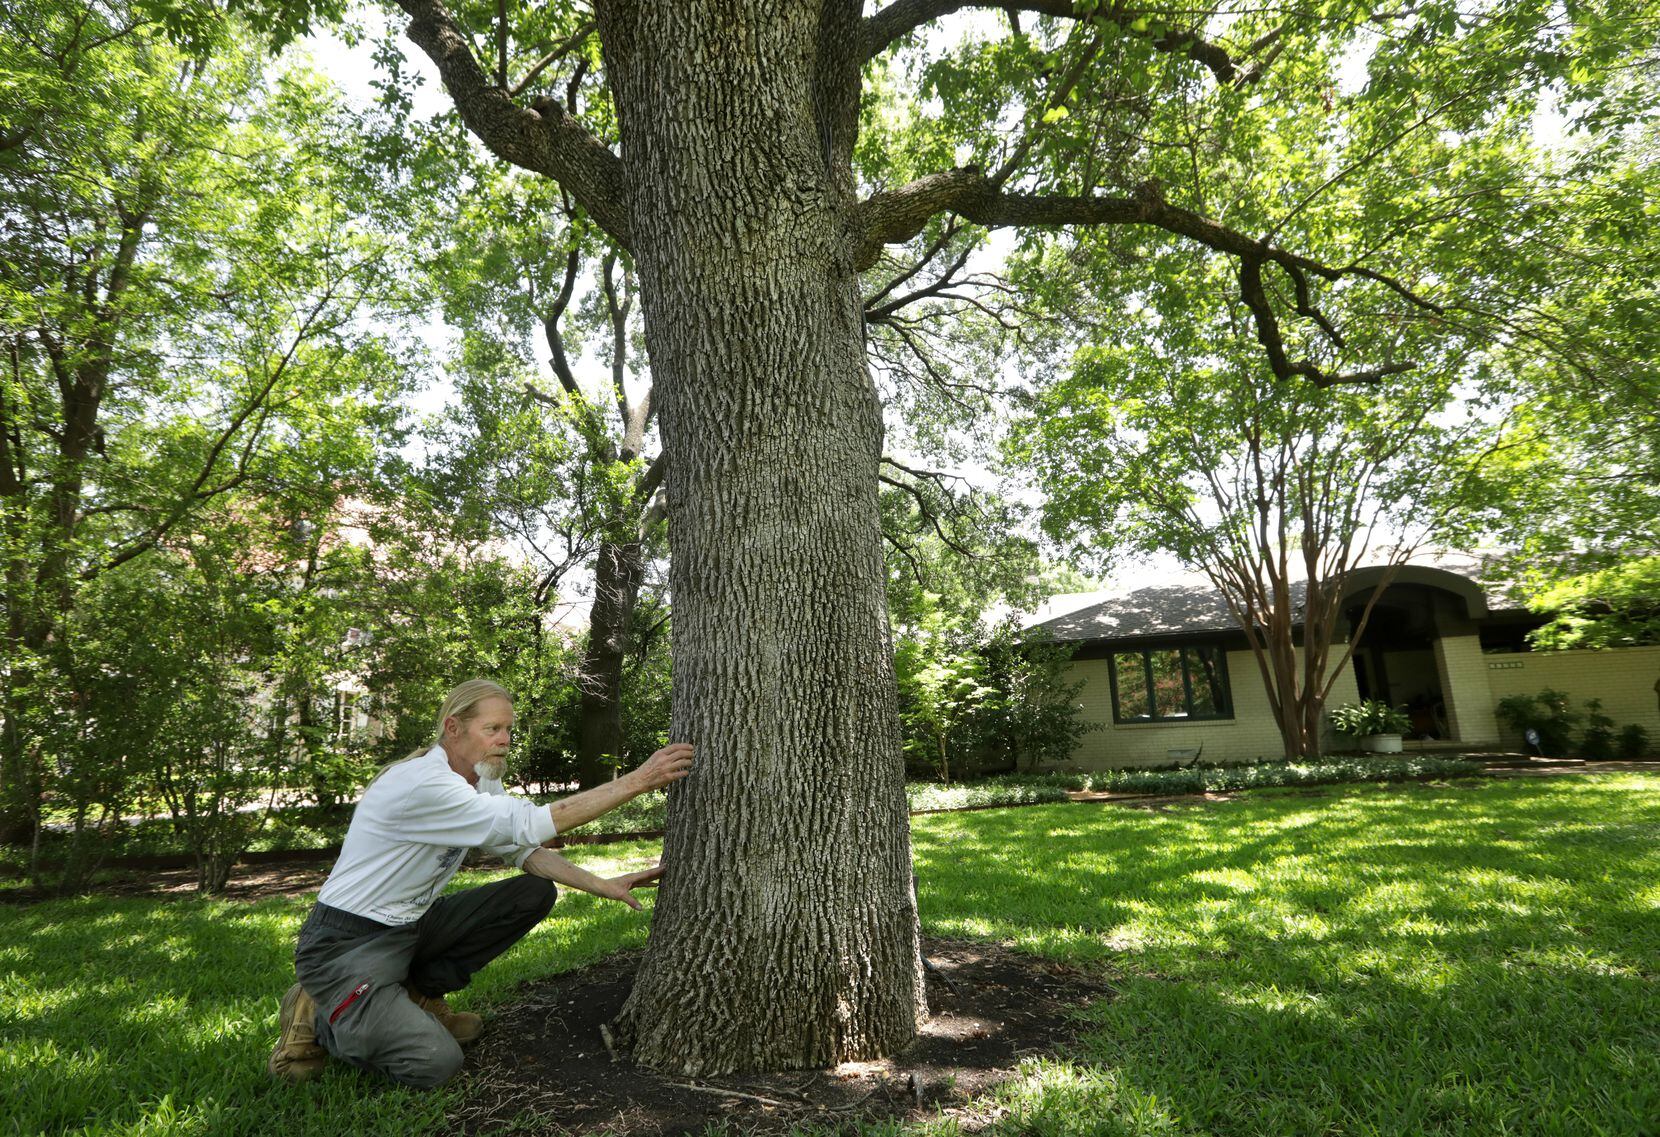 Certified arborist Steve Houser examines the bark and root system of a large ash tree at a...